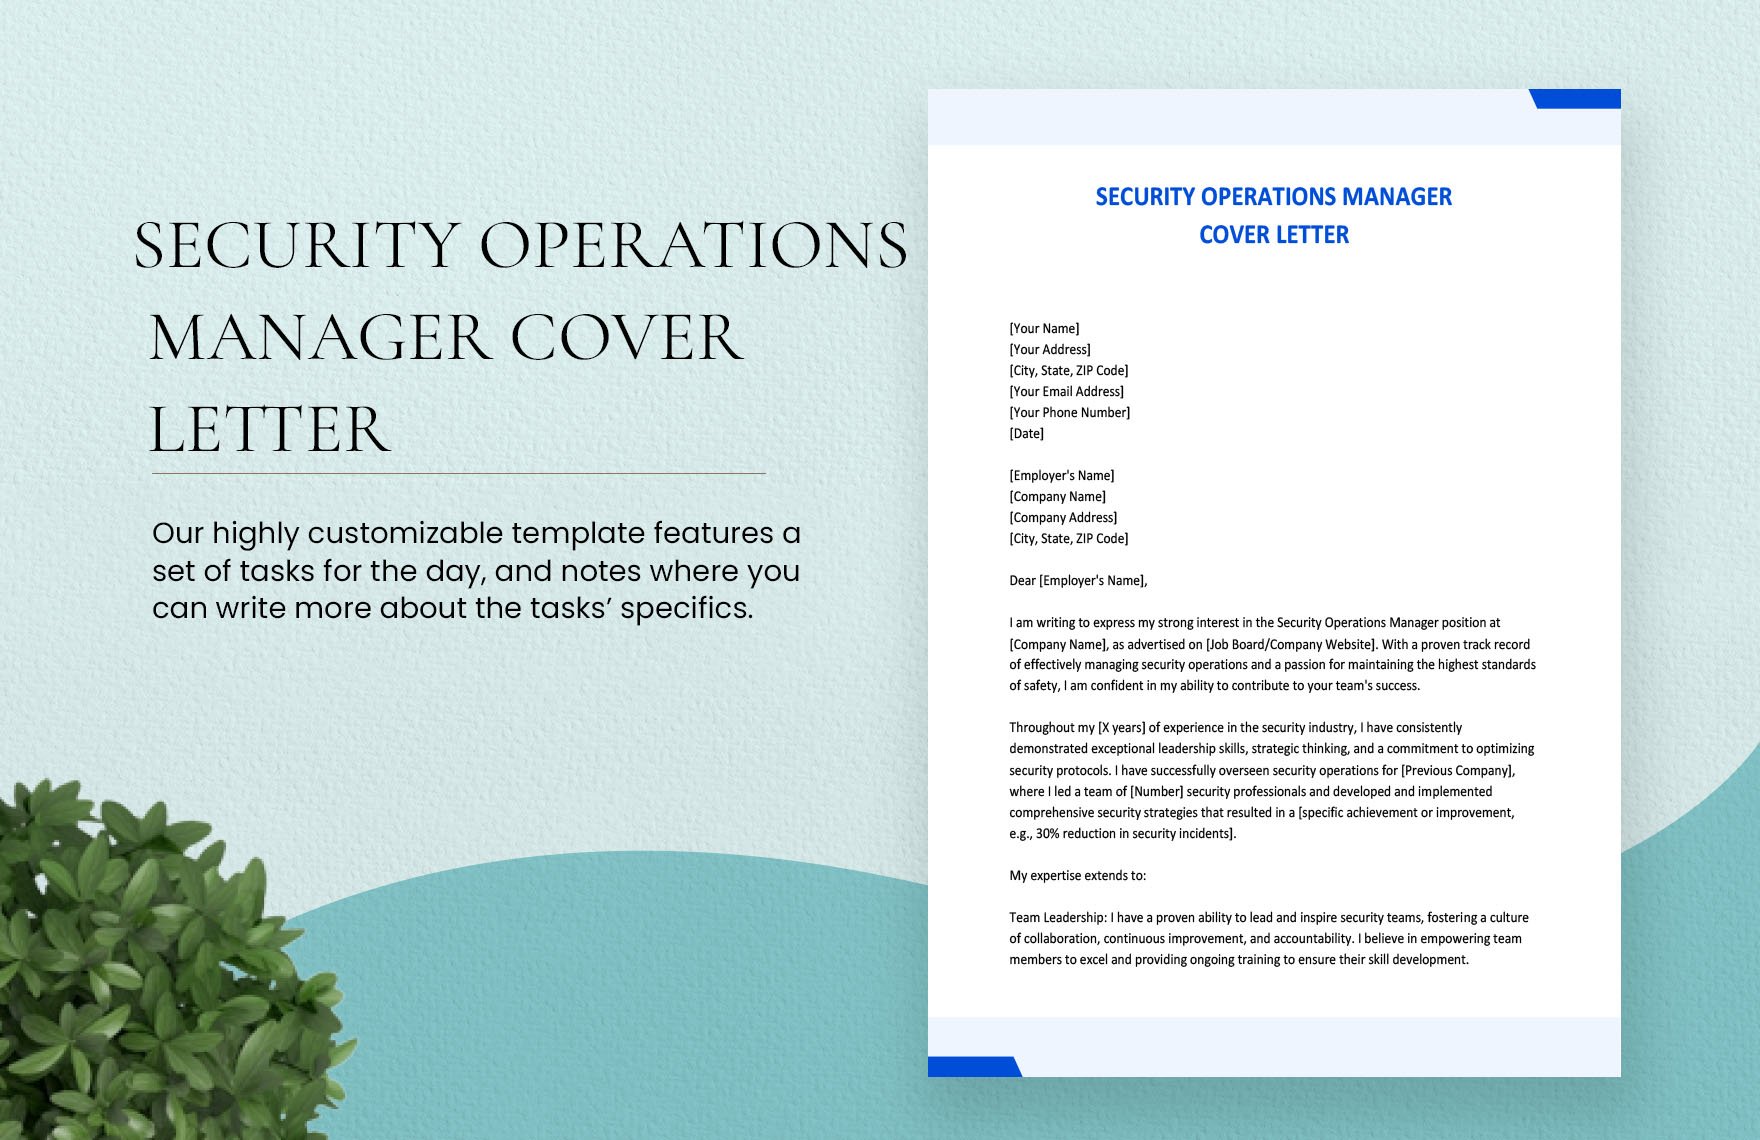 Security Operations Manager Cover Letter